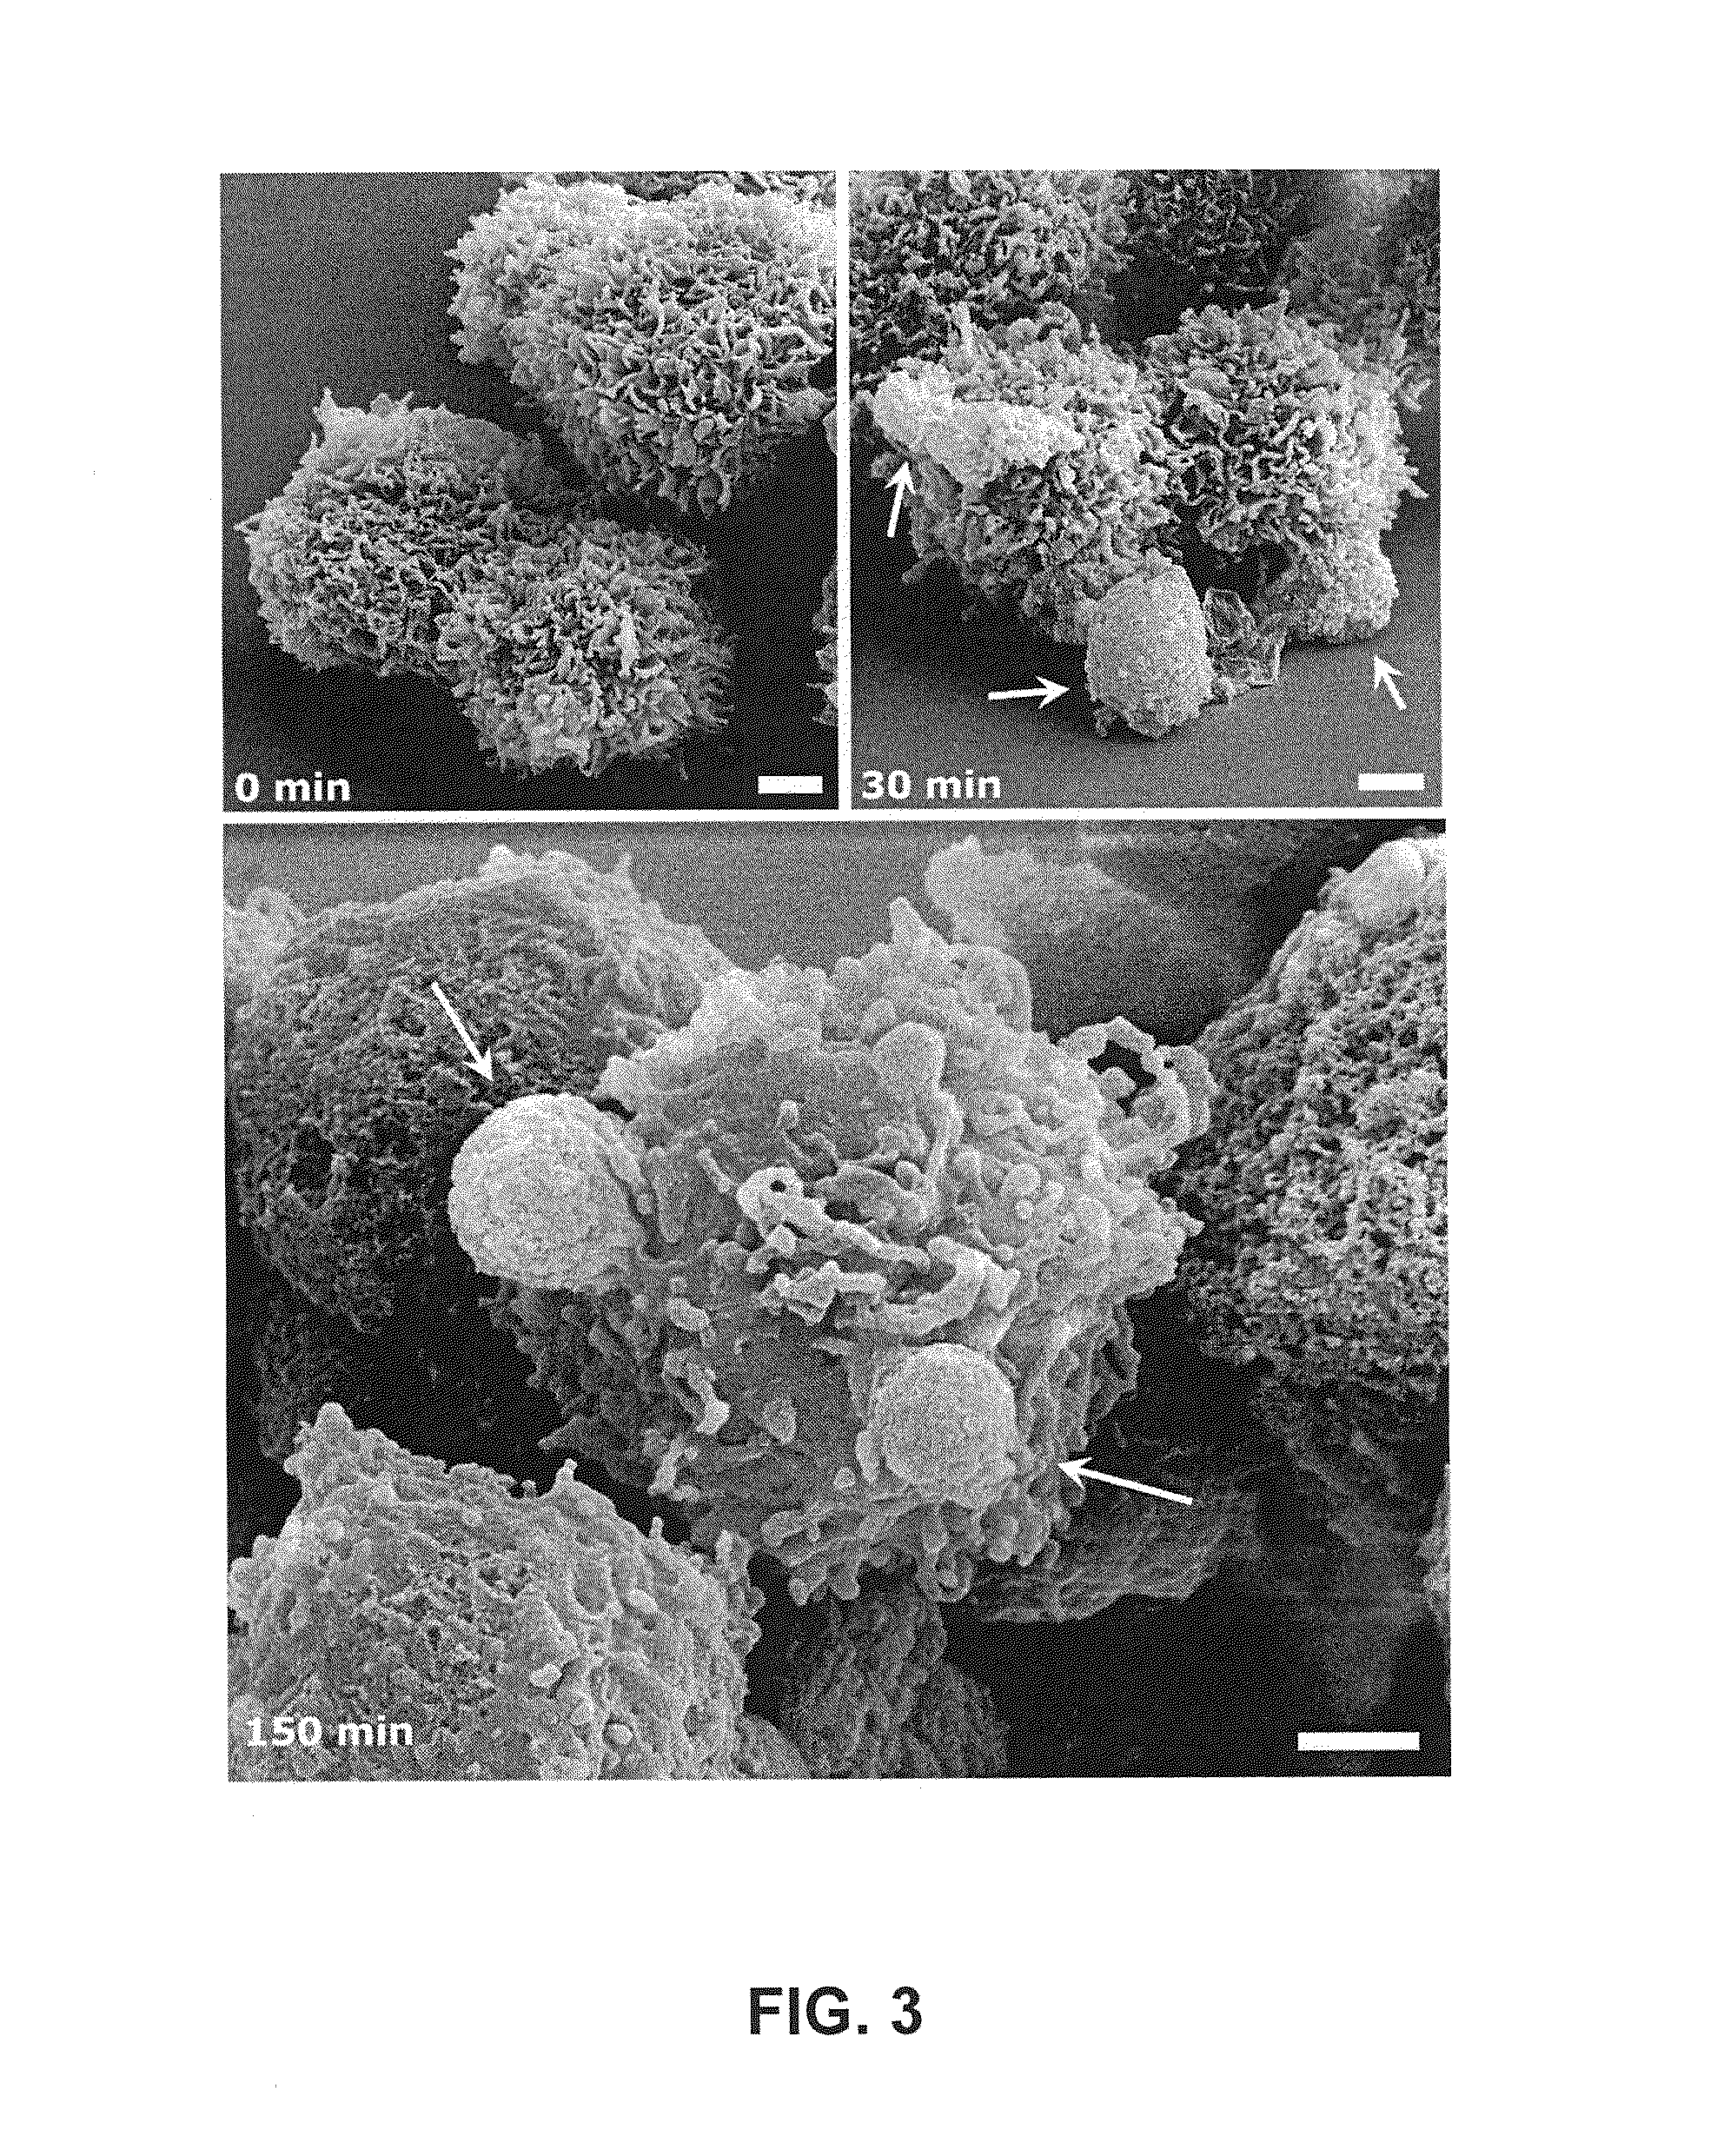 Cell-Based Composite Materials with Programmed Structures and Functions